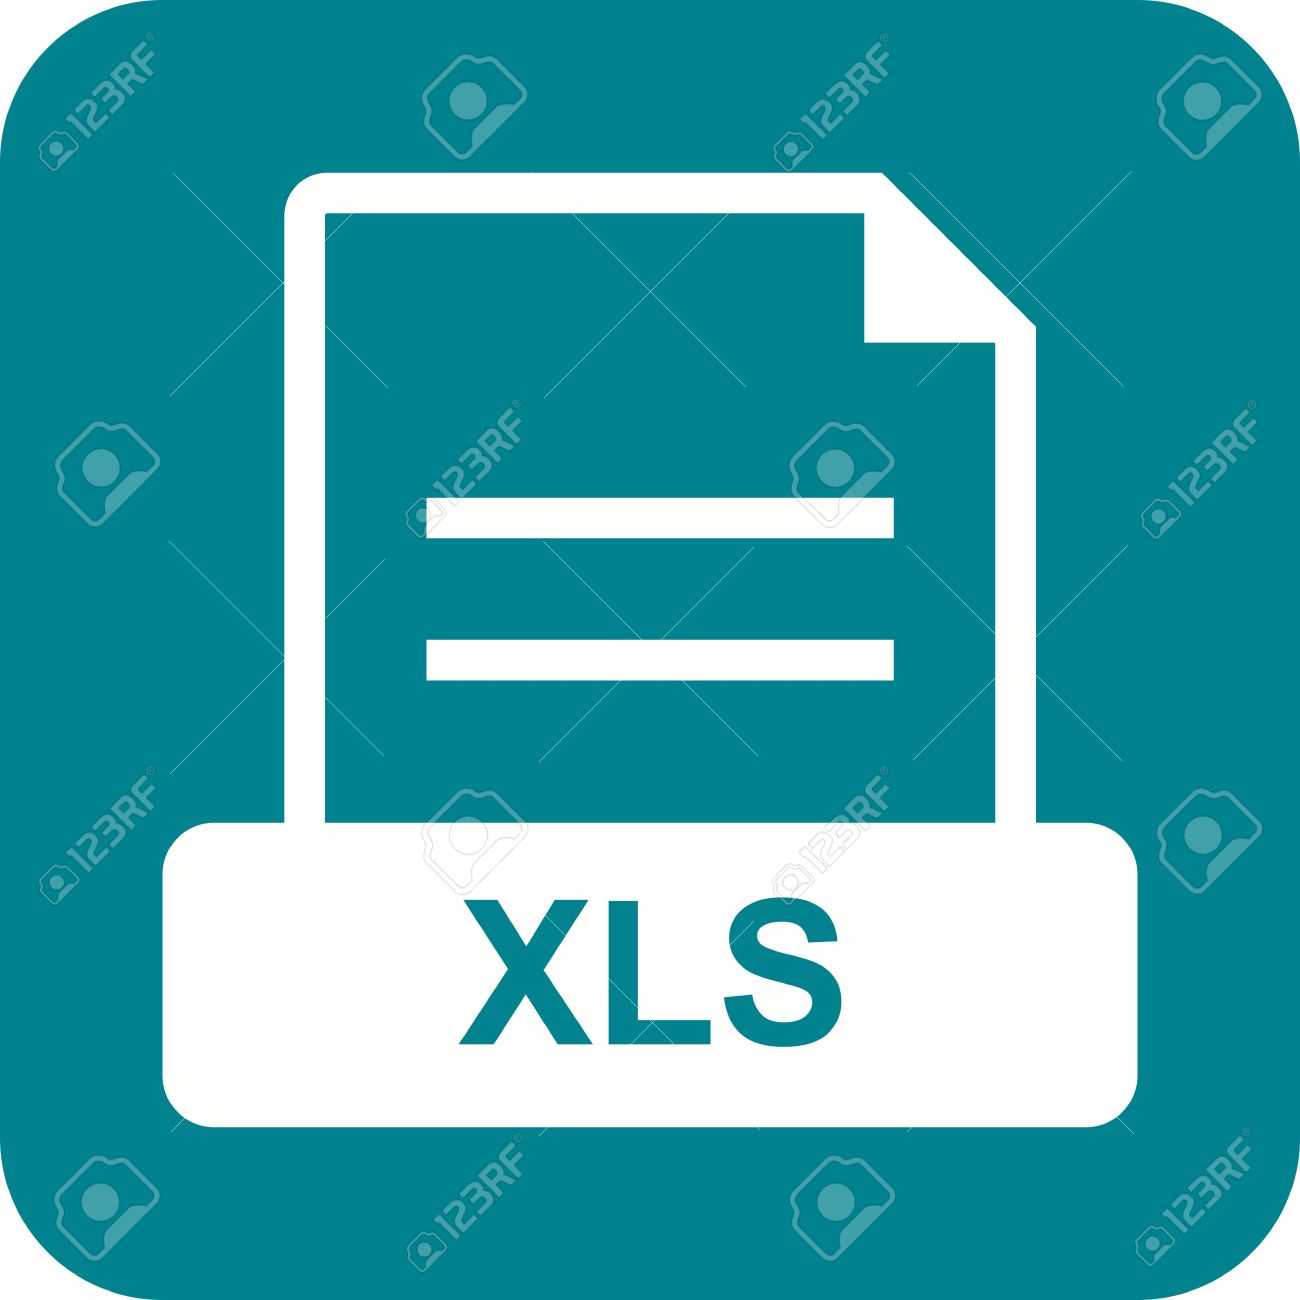 Excel, file, file format, spreadsheet, xls icon | Icon search engine